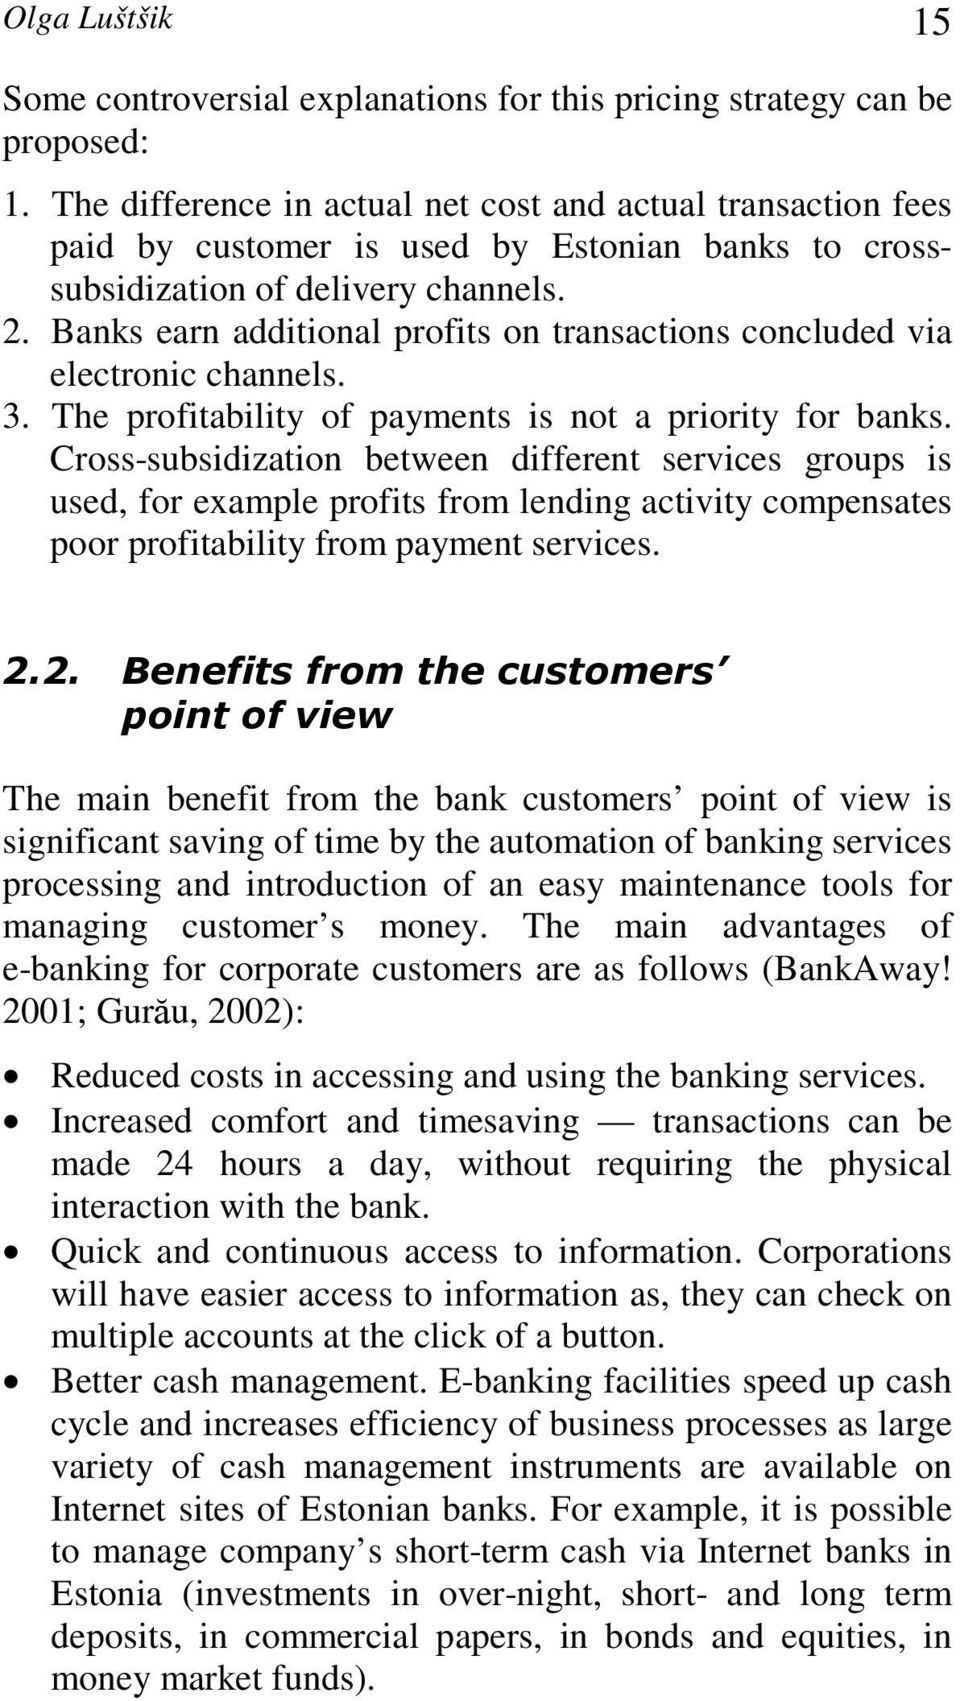 Banks earn additional profits on transactions concluded via electronic channels. 3. The profitability of payments is not a priority for banks.